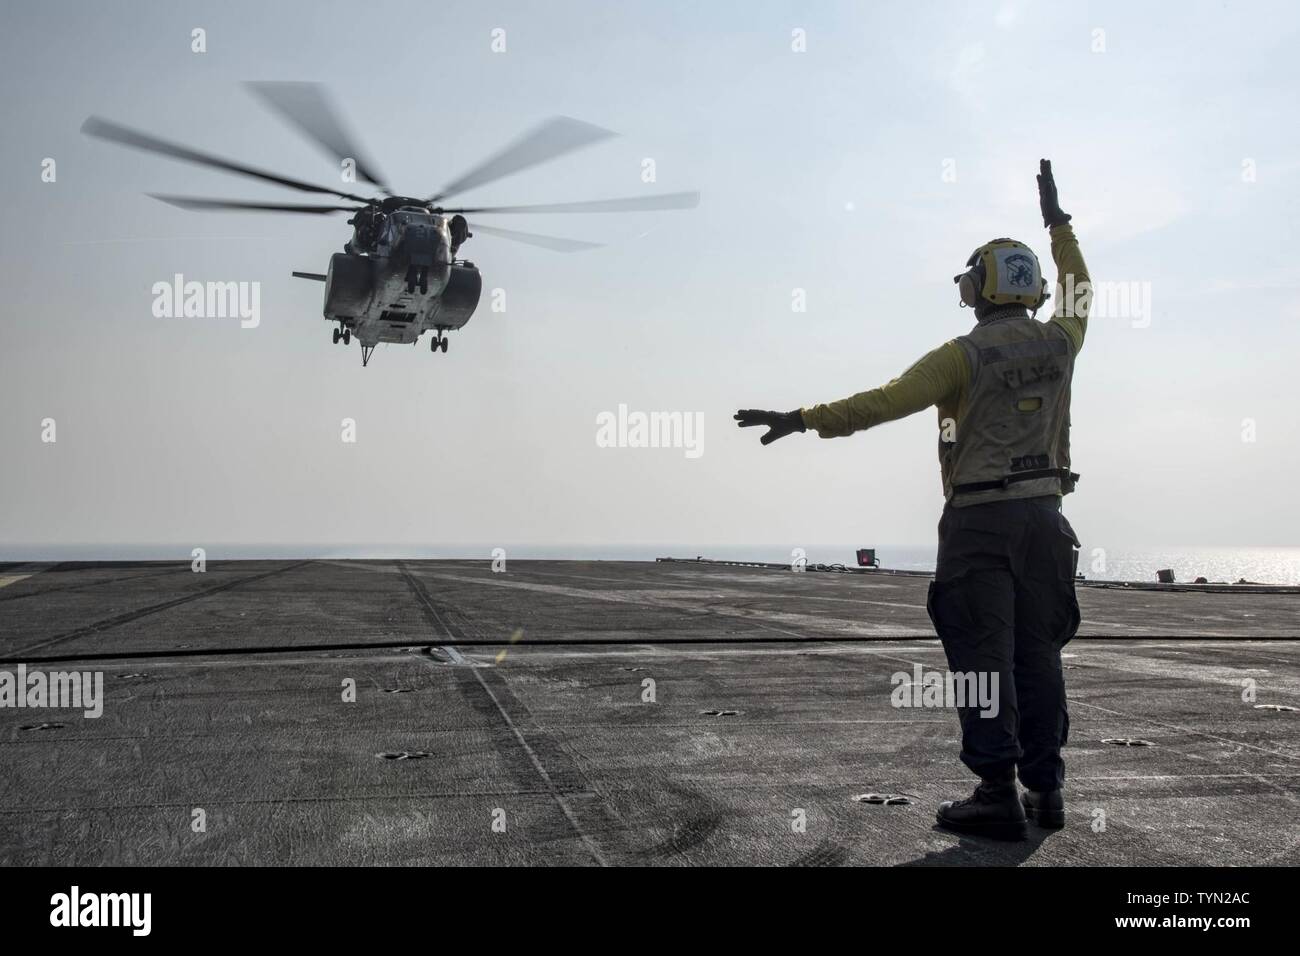 GULF (Nov. 17, 2016) Petty Officer 3rd Class Joshua Broadbent signals to an MH-53E Sea Dragon helicopter assigned to the Blackhawks of Helicopter Mine Countermeasures Squadron (HM) 15 on the flight deck of the aircraft carrier USS Dwight D. Eisenhower (CVN 69). Broadbent serves aboard the ship as an aviation boatswain's mate (handling). Eisenhower and its carrier strike group are deployed in support of Operation Inherent Resolve, maritime security operations and theater security cooperation efforts in the U.S. 5th Fleet area of operations. Stock Photo